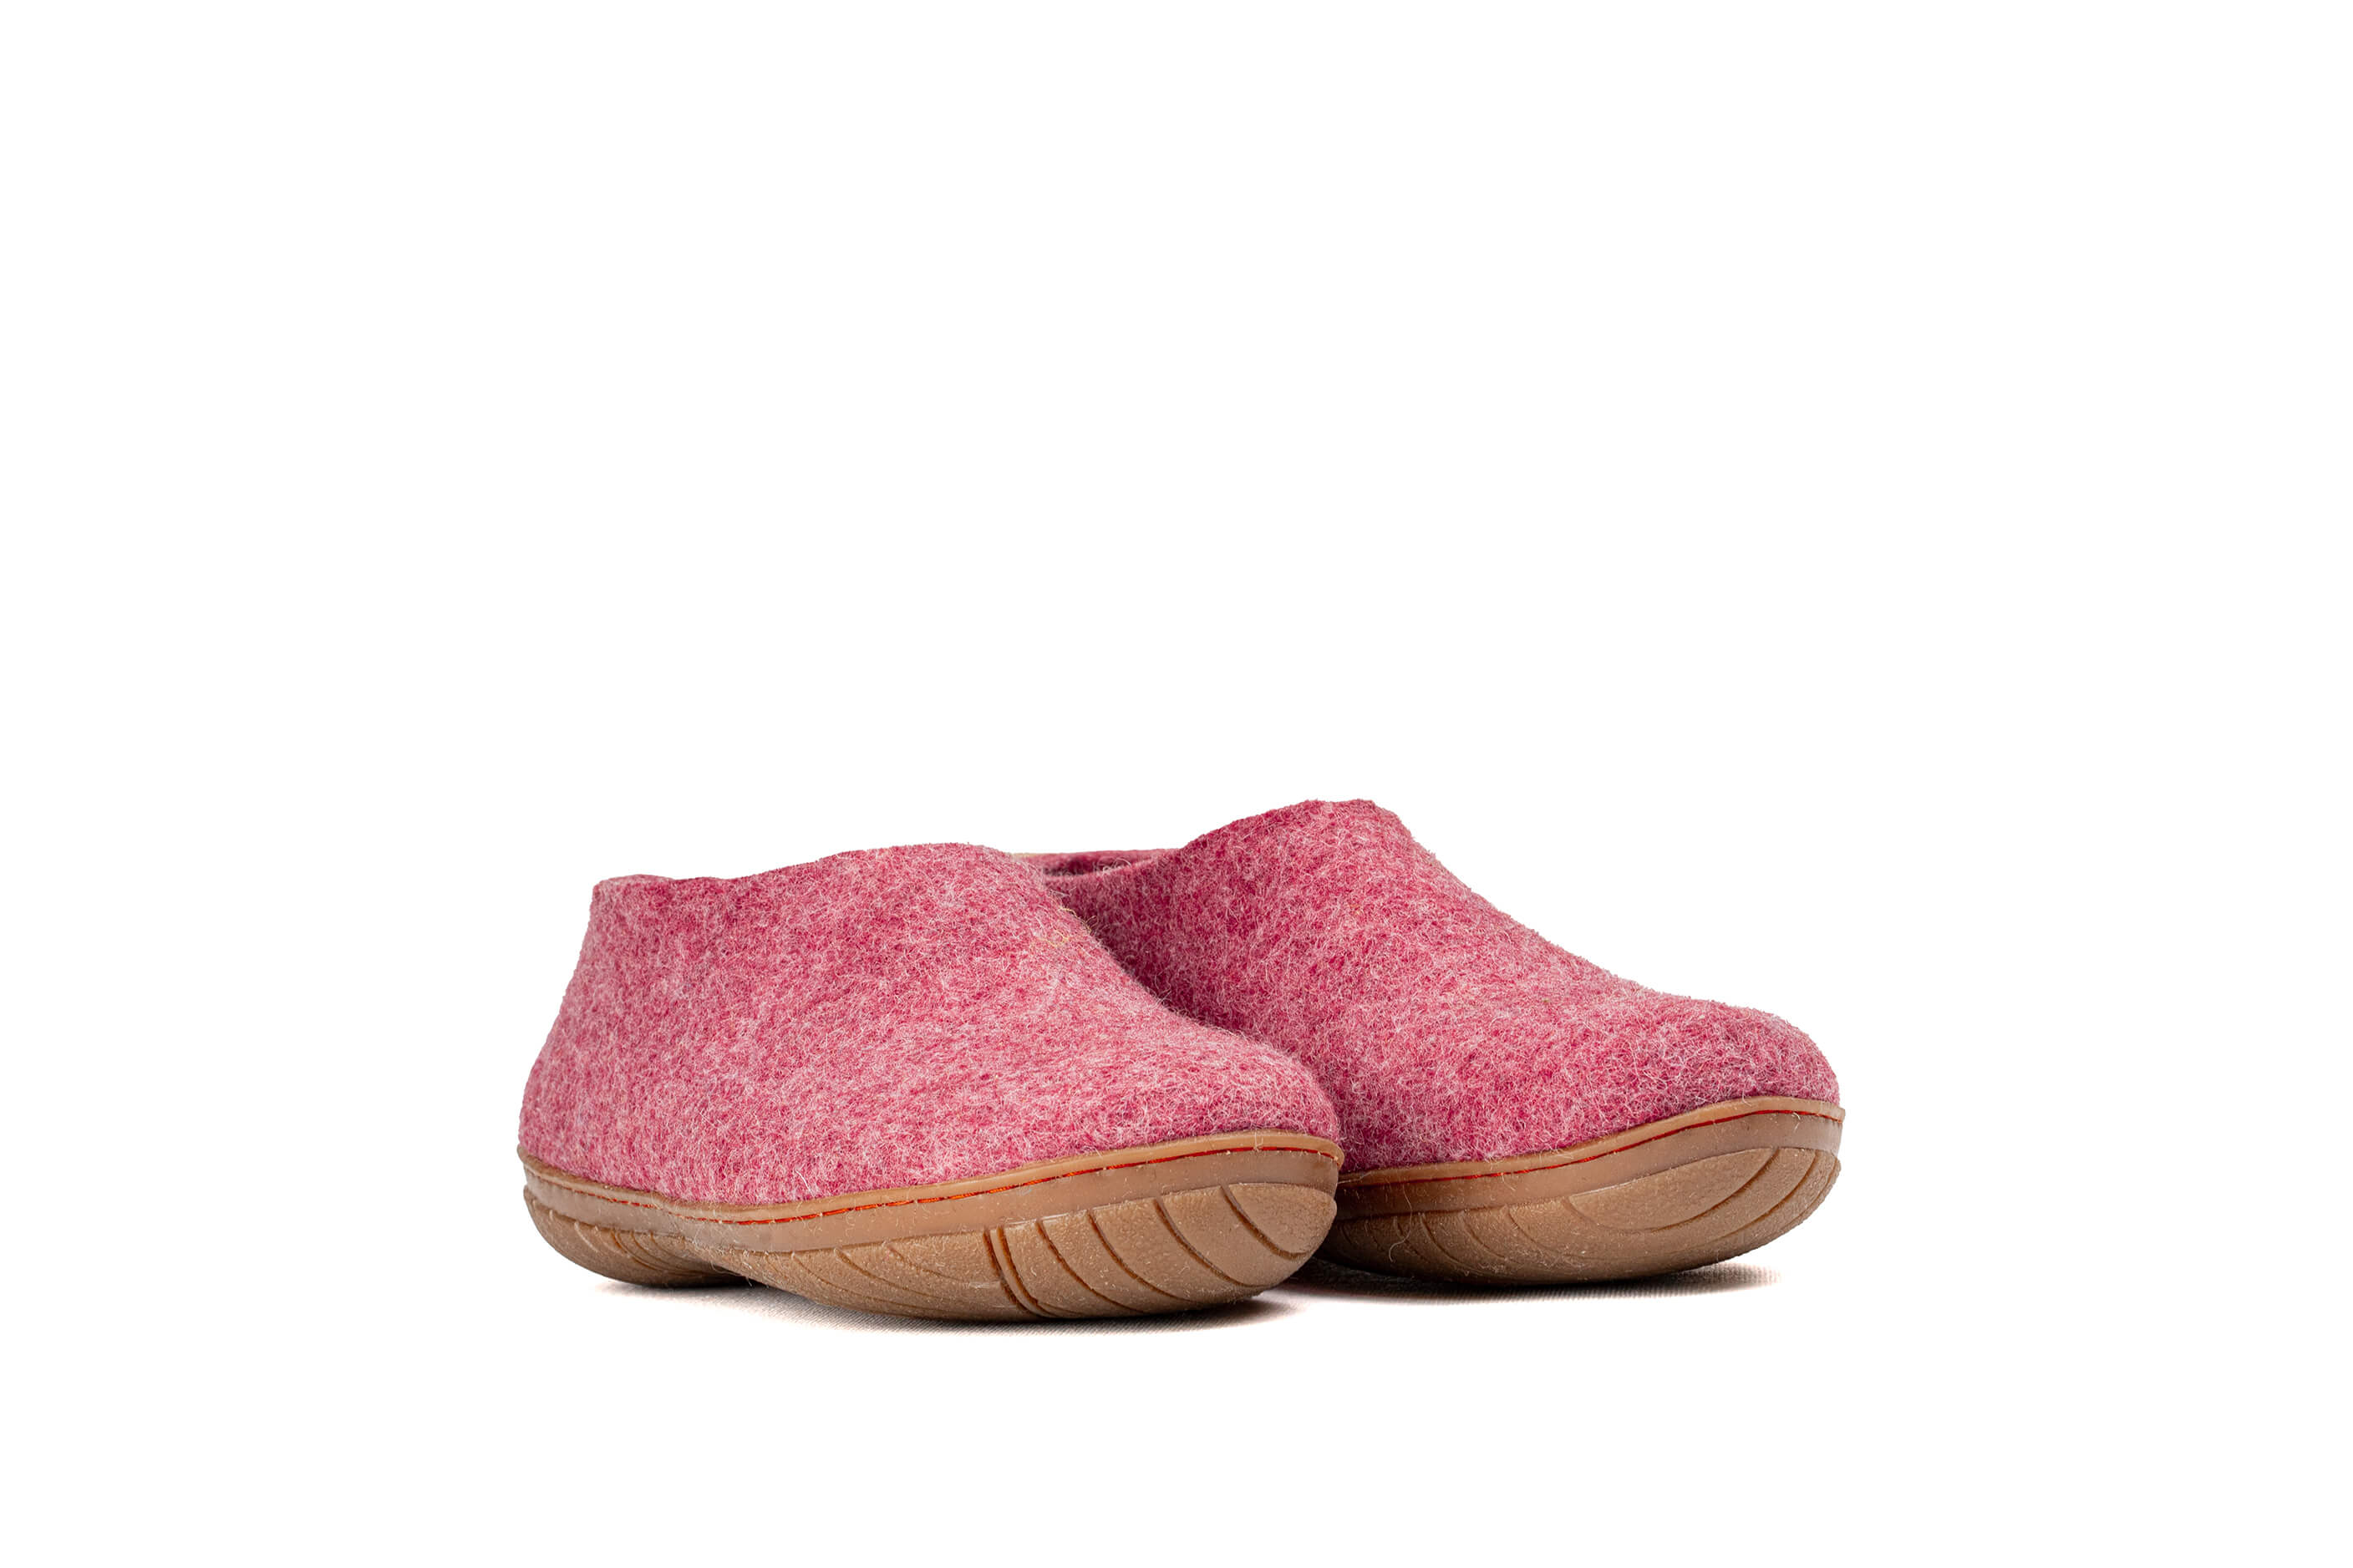 Woollyes Felted Outdoor Shoes With Rubber Sole - Cherry Pink